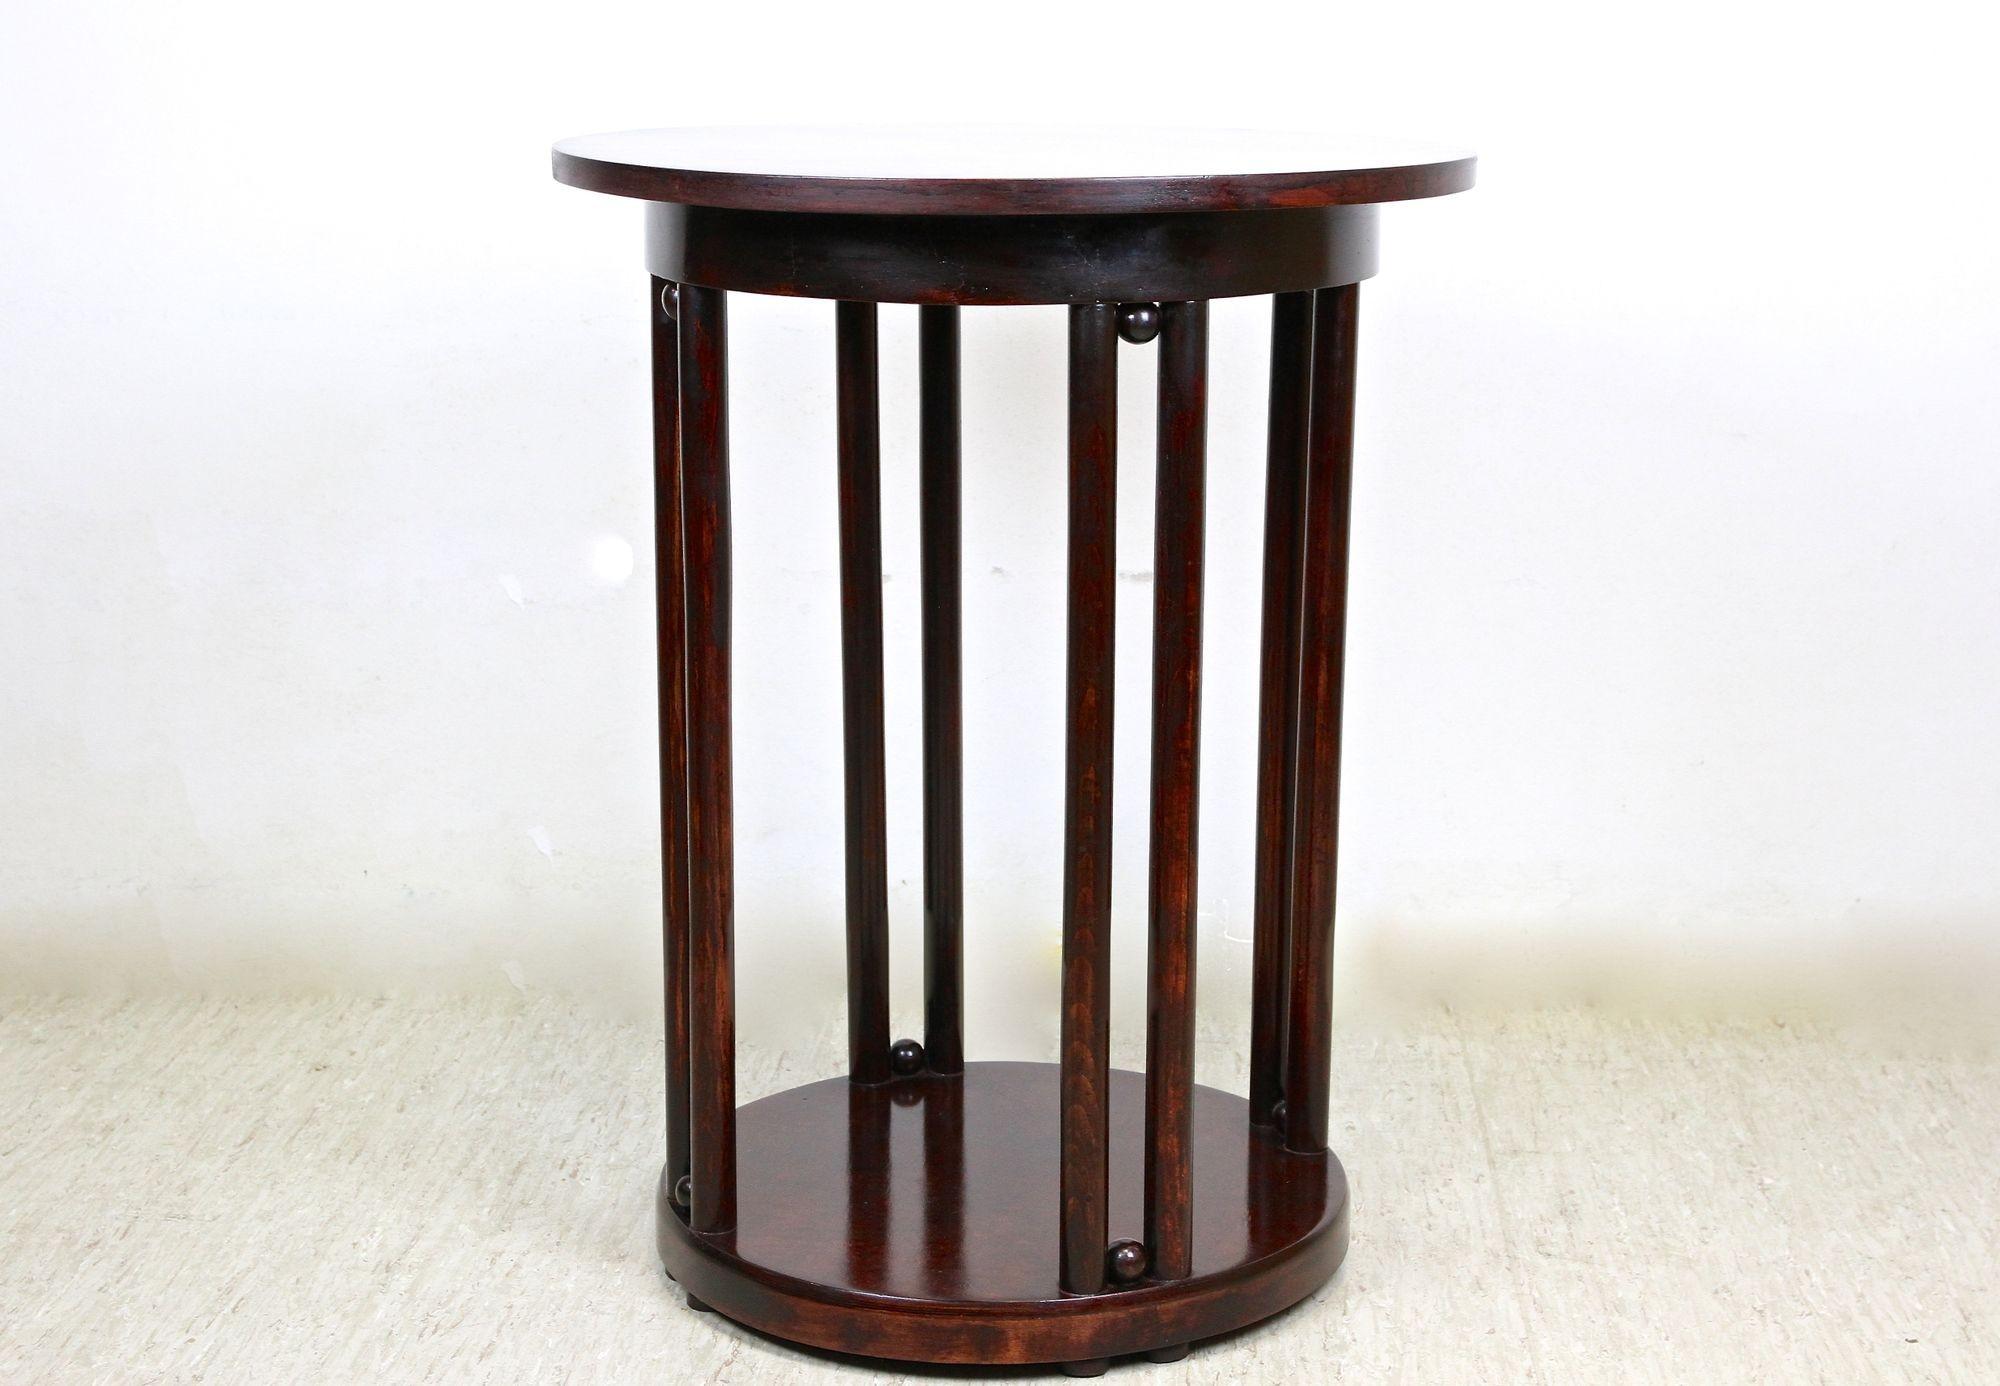 20th Century Thonet Bentwood Side Table, Design by Josef Hoffmann, Austria ca. 1906 For Sale